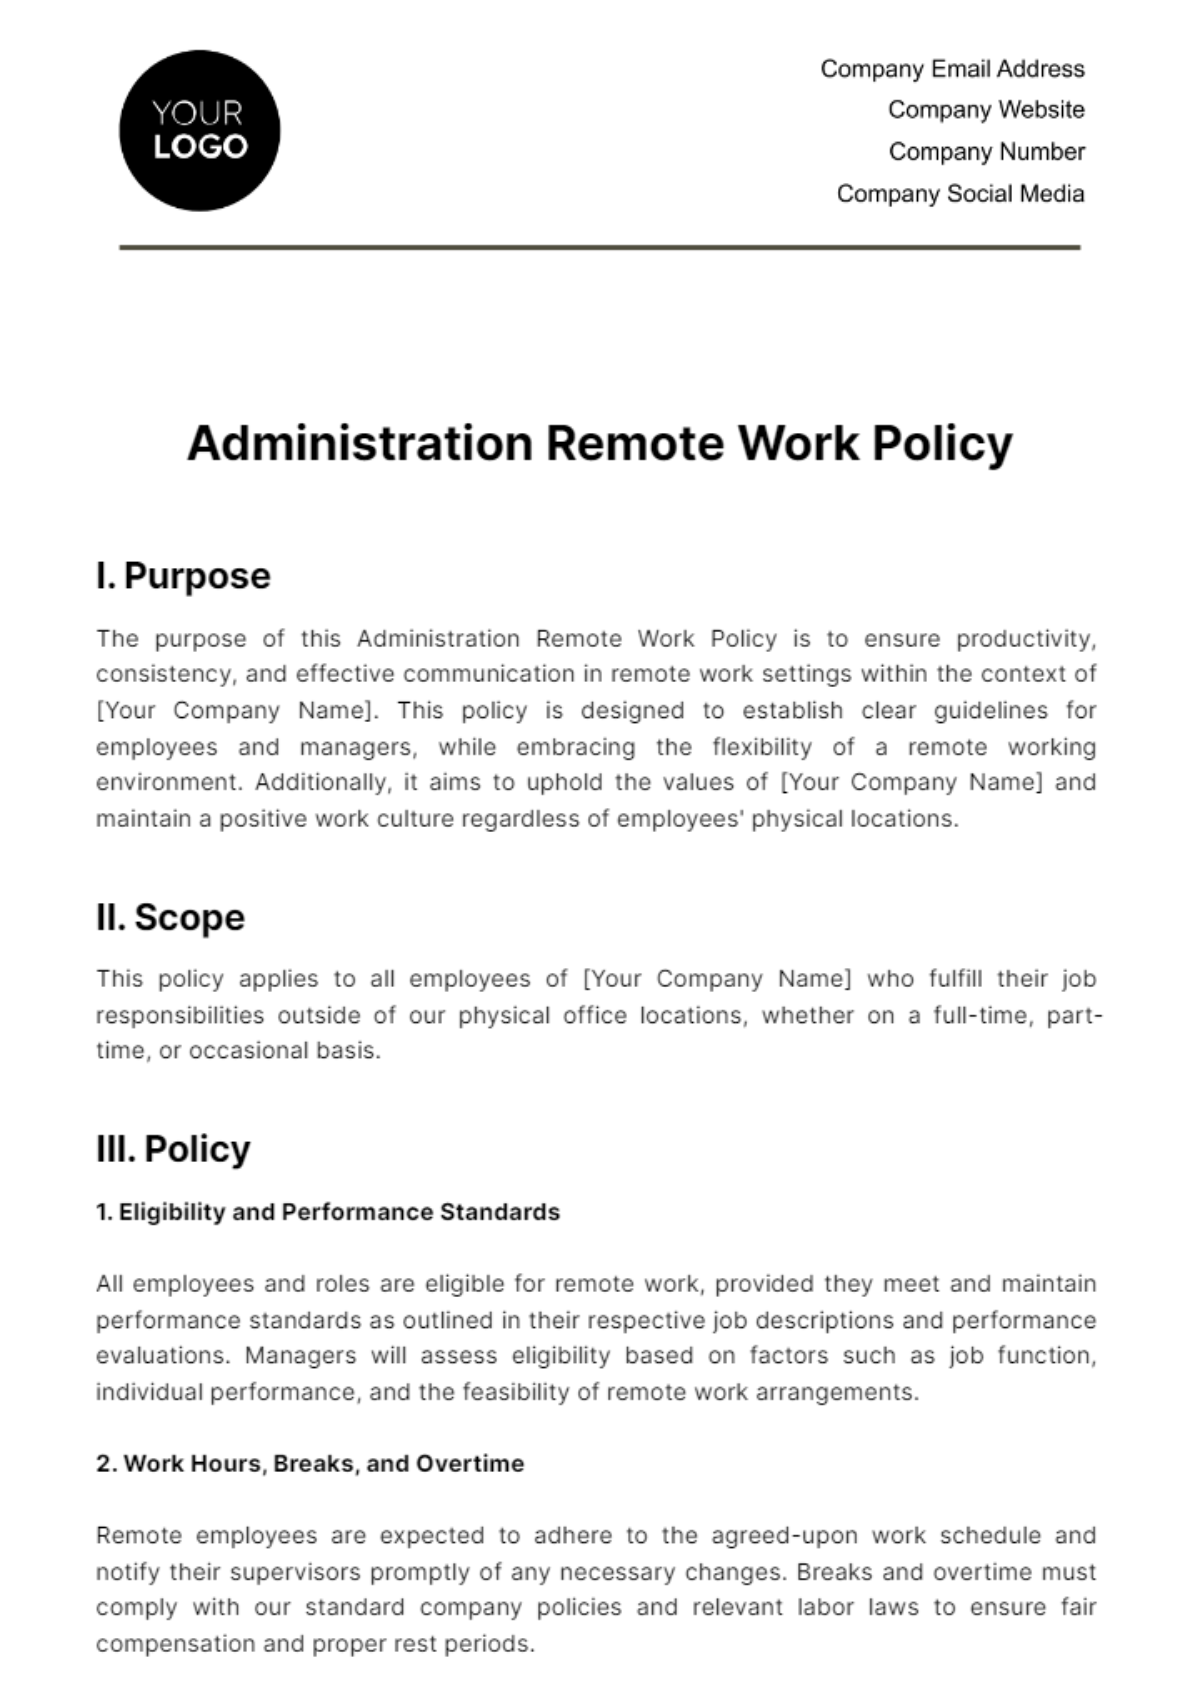 Free Administration Remote Work Policy Template